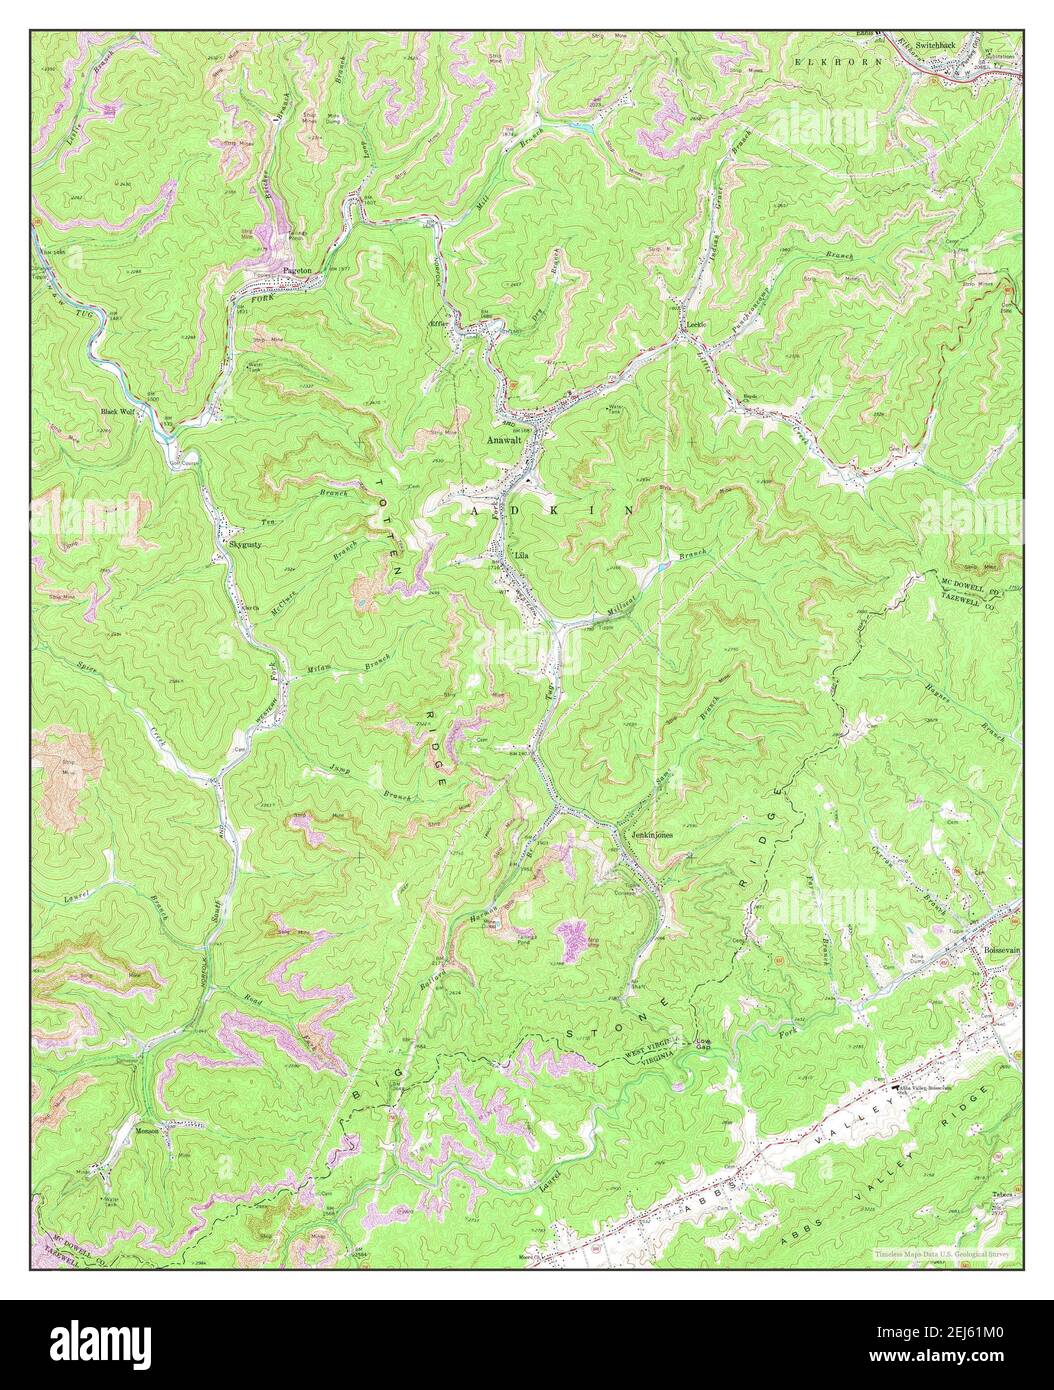 Anawalt, West Virginia, map 1968, 1:24000, United States of America by Timeless Maps, data U.S. Geological Survey Stock Photo